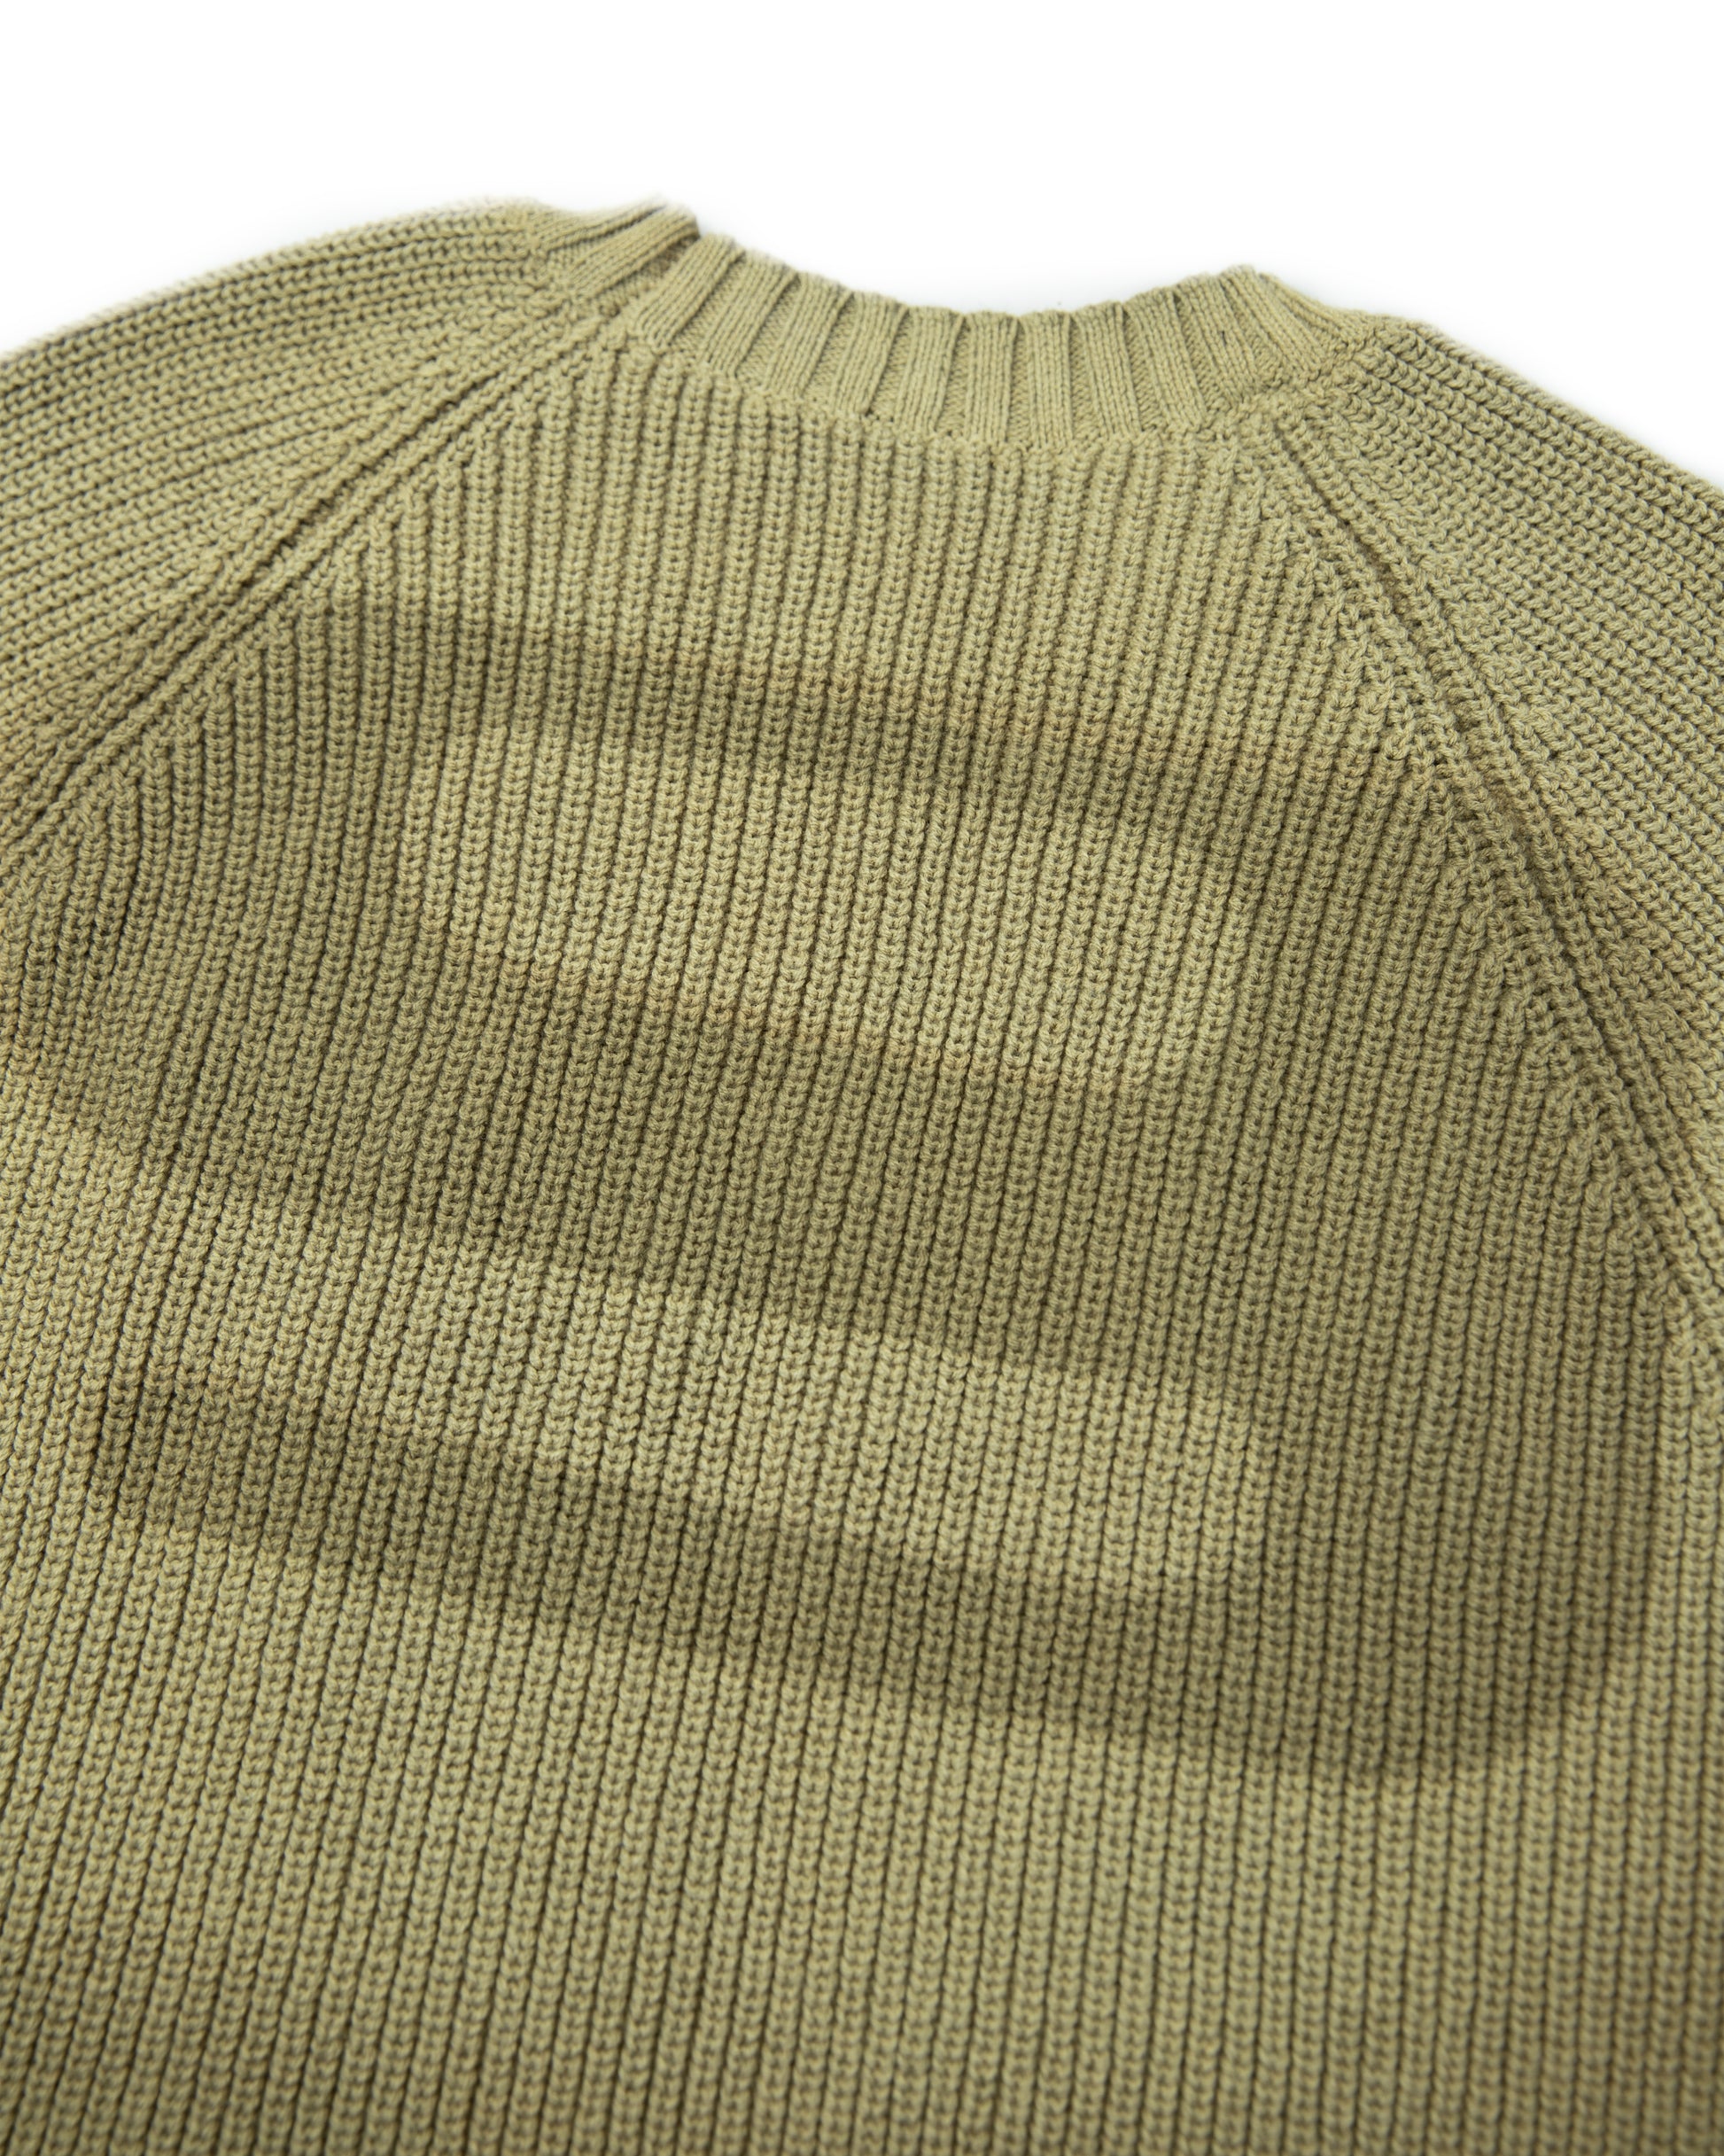 yellow-logo-washed-knit-sweater-goldie-astoudyellow-logo-washed-knit-sweater-goldie-astoud